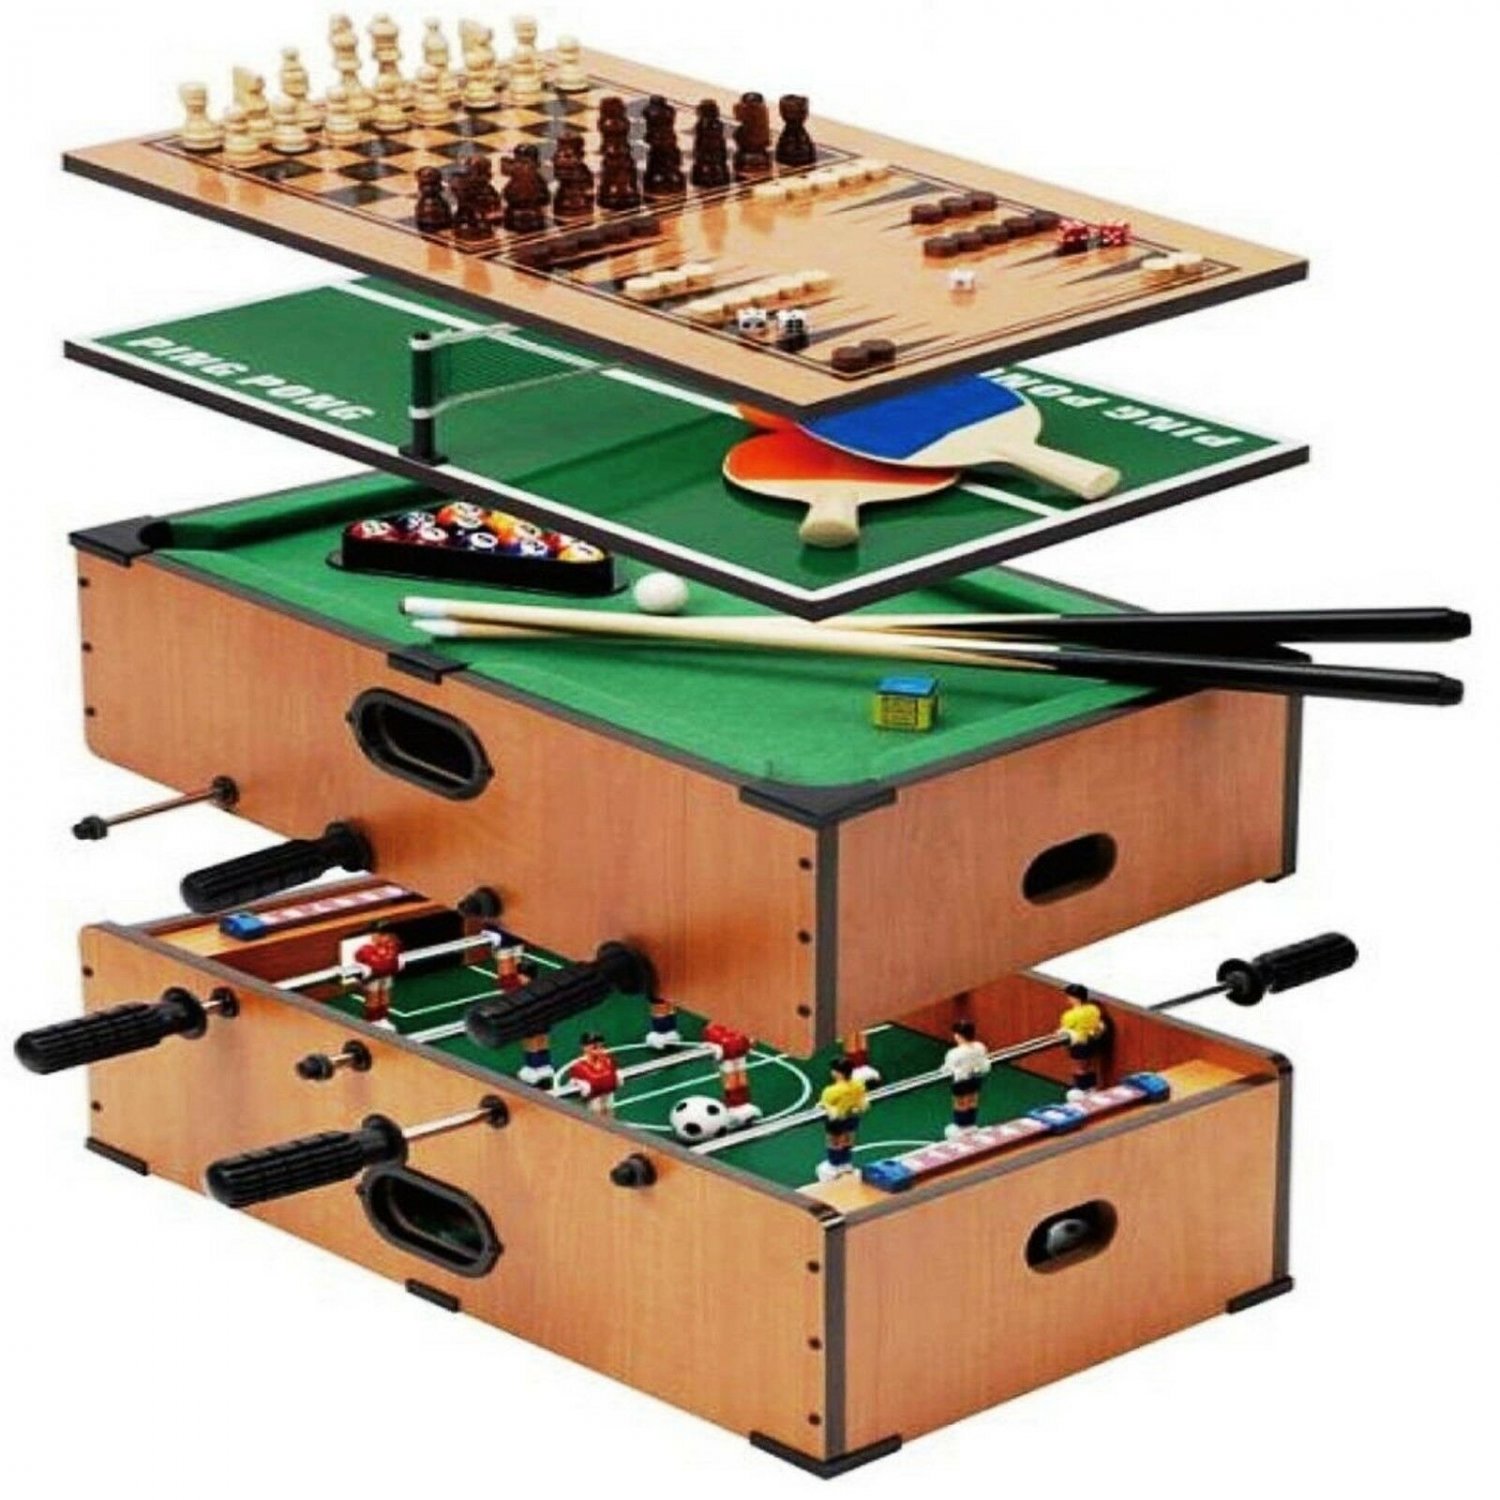 5-in-1 Indoor Games Table Set Football Pool Ping Pong Backgammon